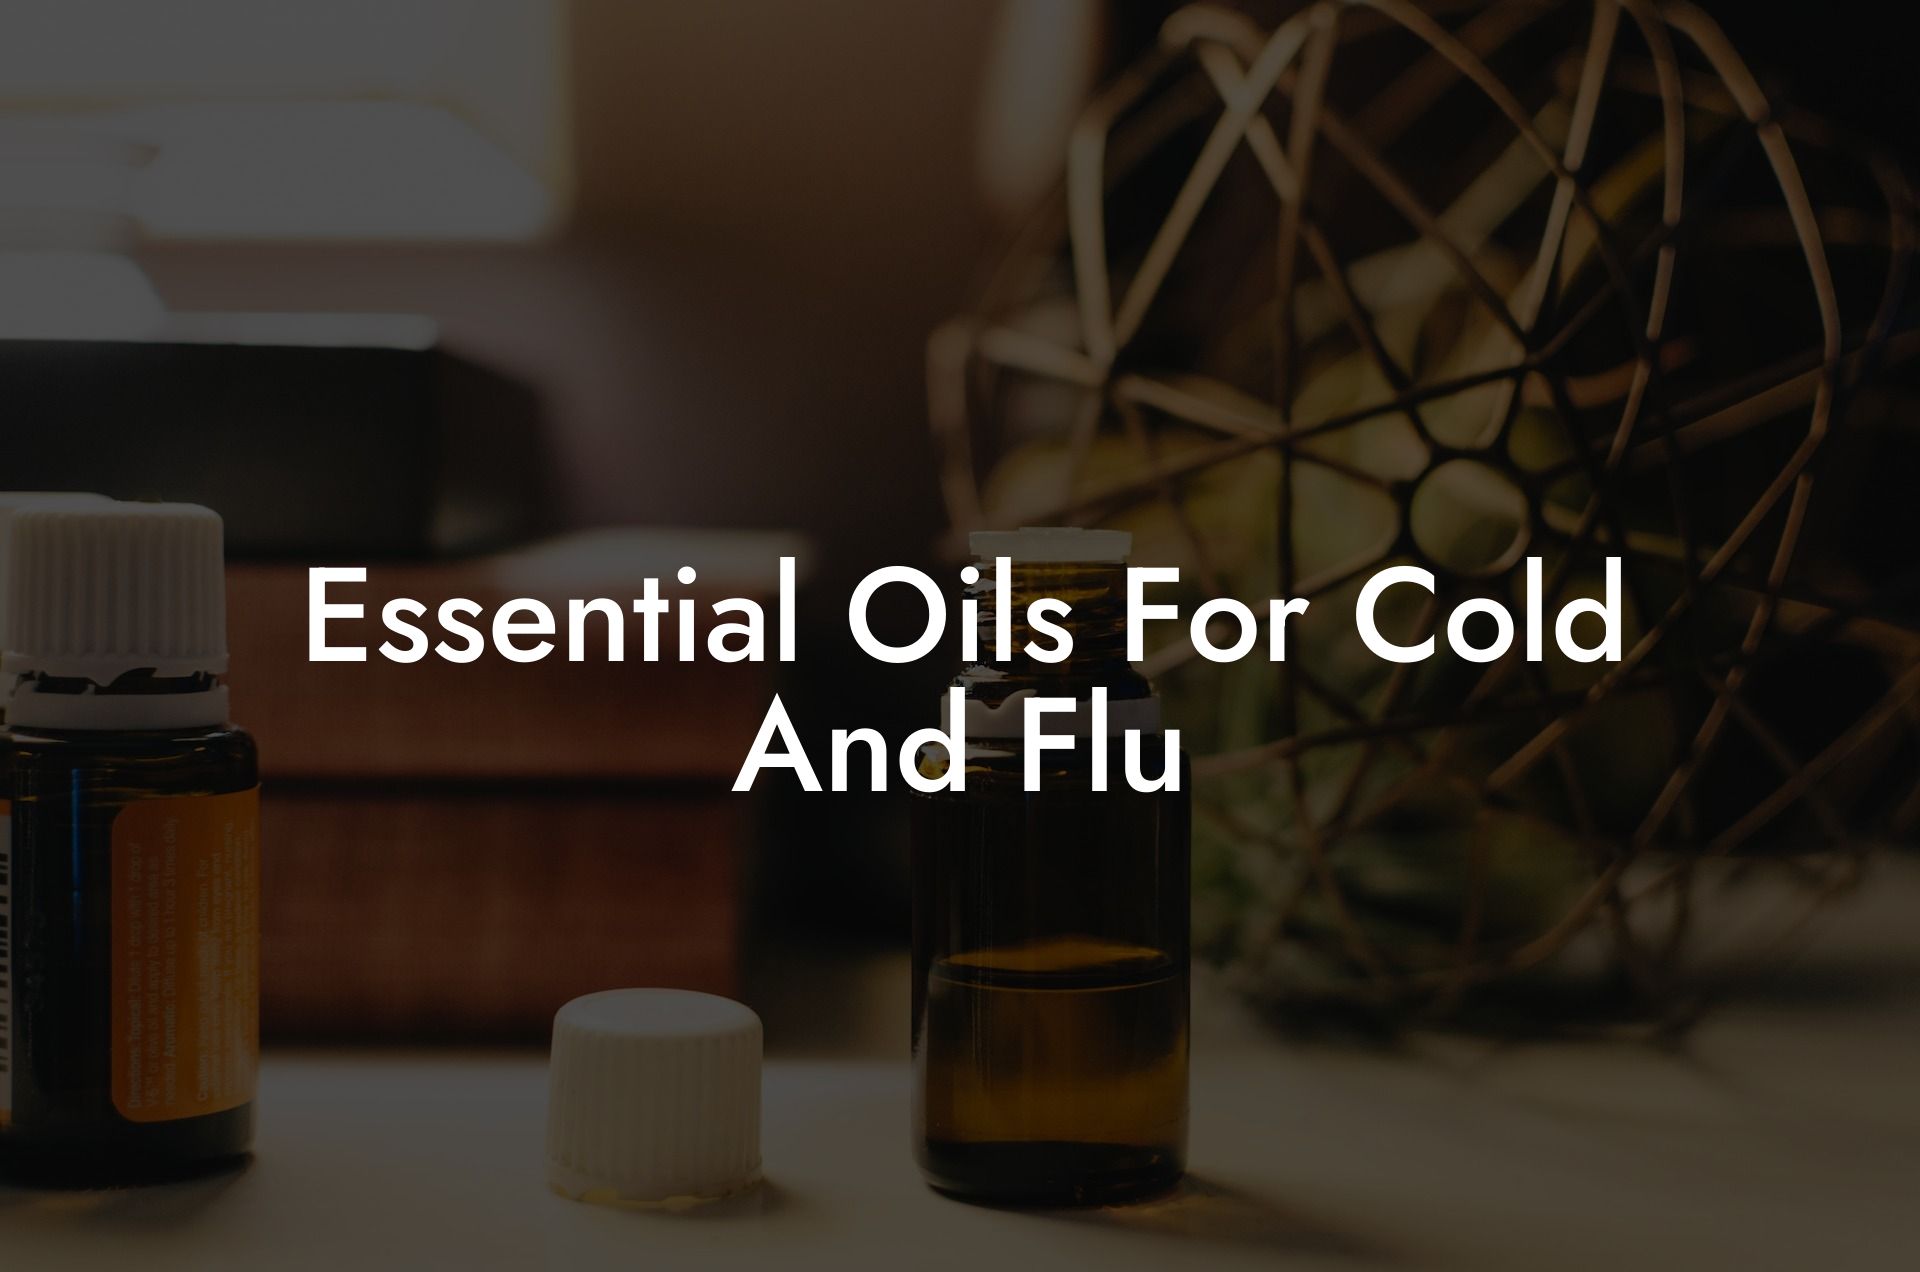 Essential Oils For Cold And Flu